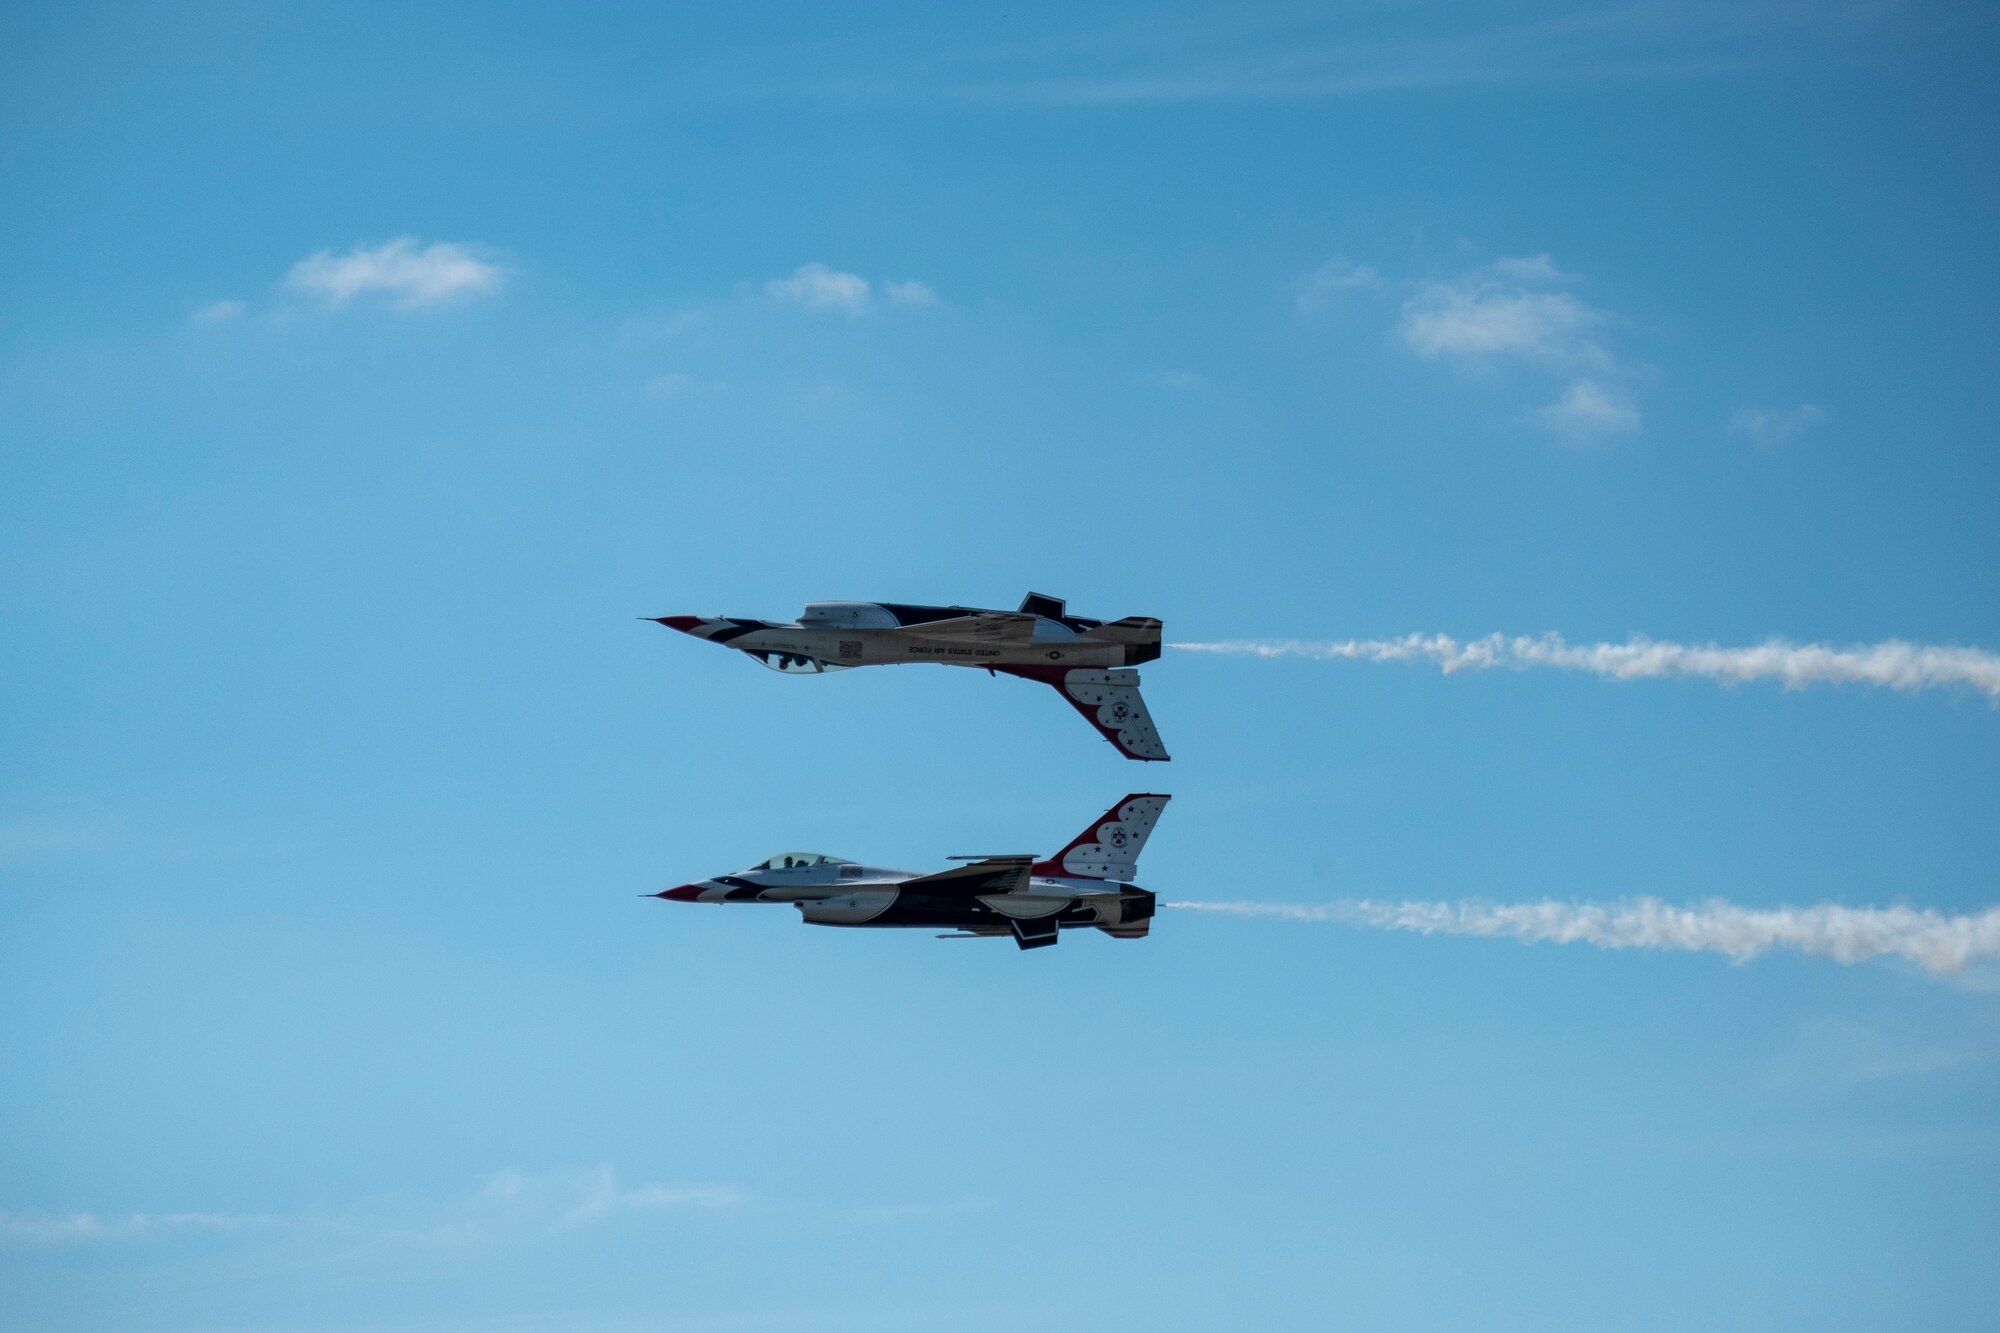 Members of the U.S. Thunderbirds perform for Team McConnell at the Frontiers in Flight Open House and Airshow Sept. 9, 2018, McConnell Air Force Base, Kan. In 1953 the Air Force activated the 3600th Demonstration Unit, which adopted the name “Thunderbirds,” establishing a 55-year heritage of displaying the capabilities of the most powerful Air Force in the world. (U.S. Air Force Photo by Staff Sgt. Preston Webb)